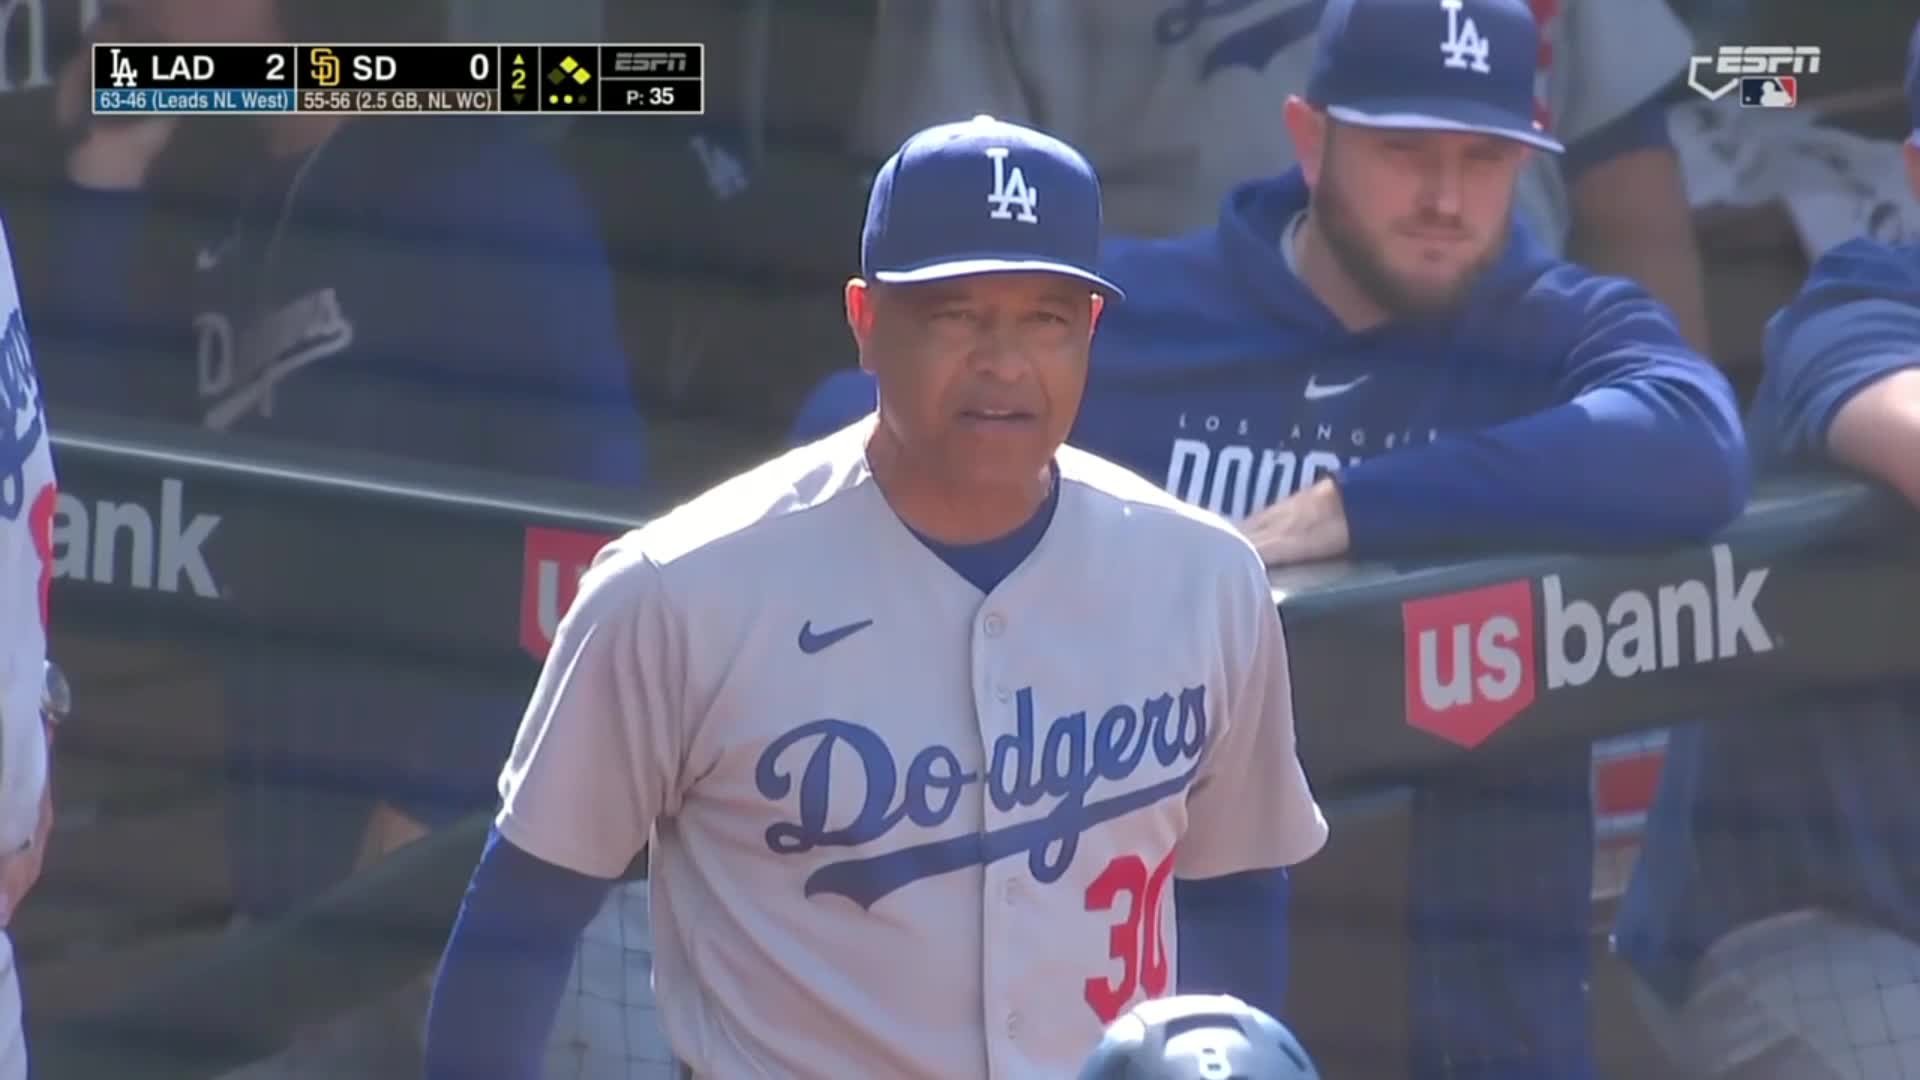 Kike Hernandez - There will be a Game 7 because of this guy!!! Despite  being 72 years old; he pitched his butt off, kept us in the game and gave  us a